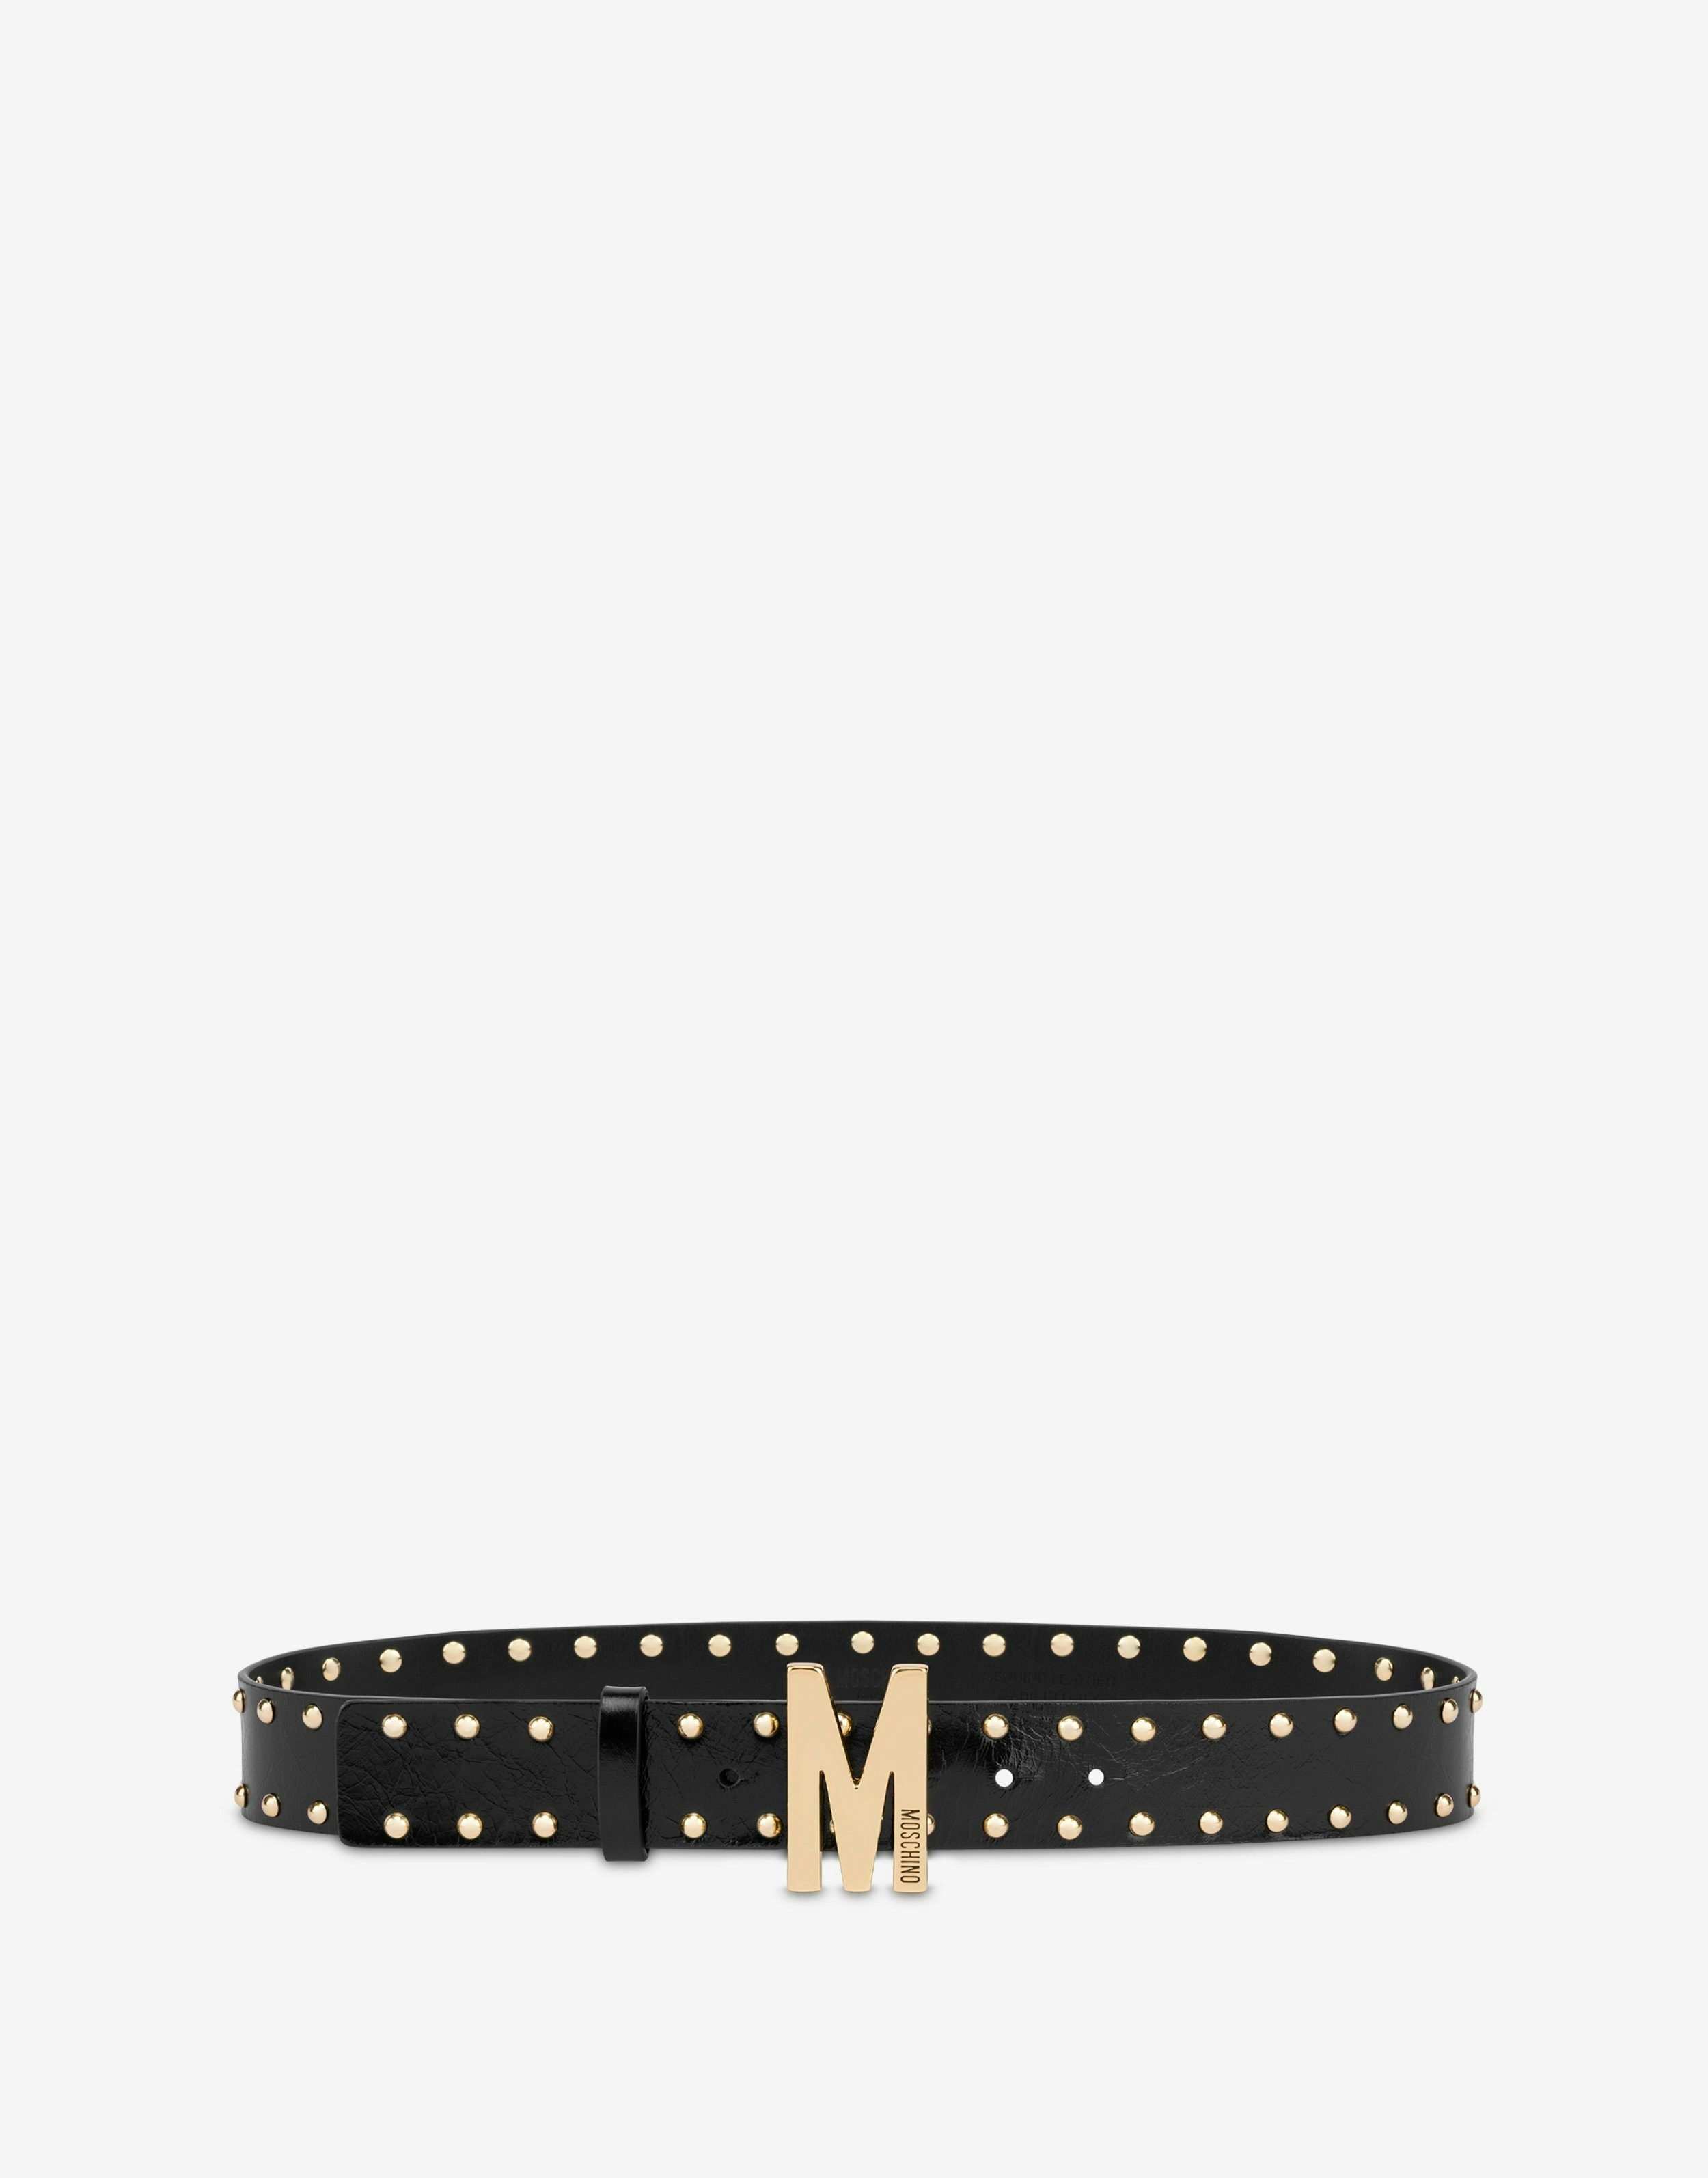 Moschino Logo Leather Belt in Black Save 28% Womens Belts Moschino Belts 